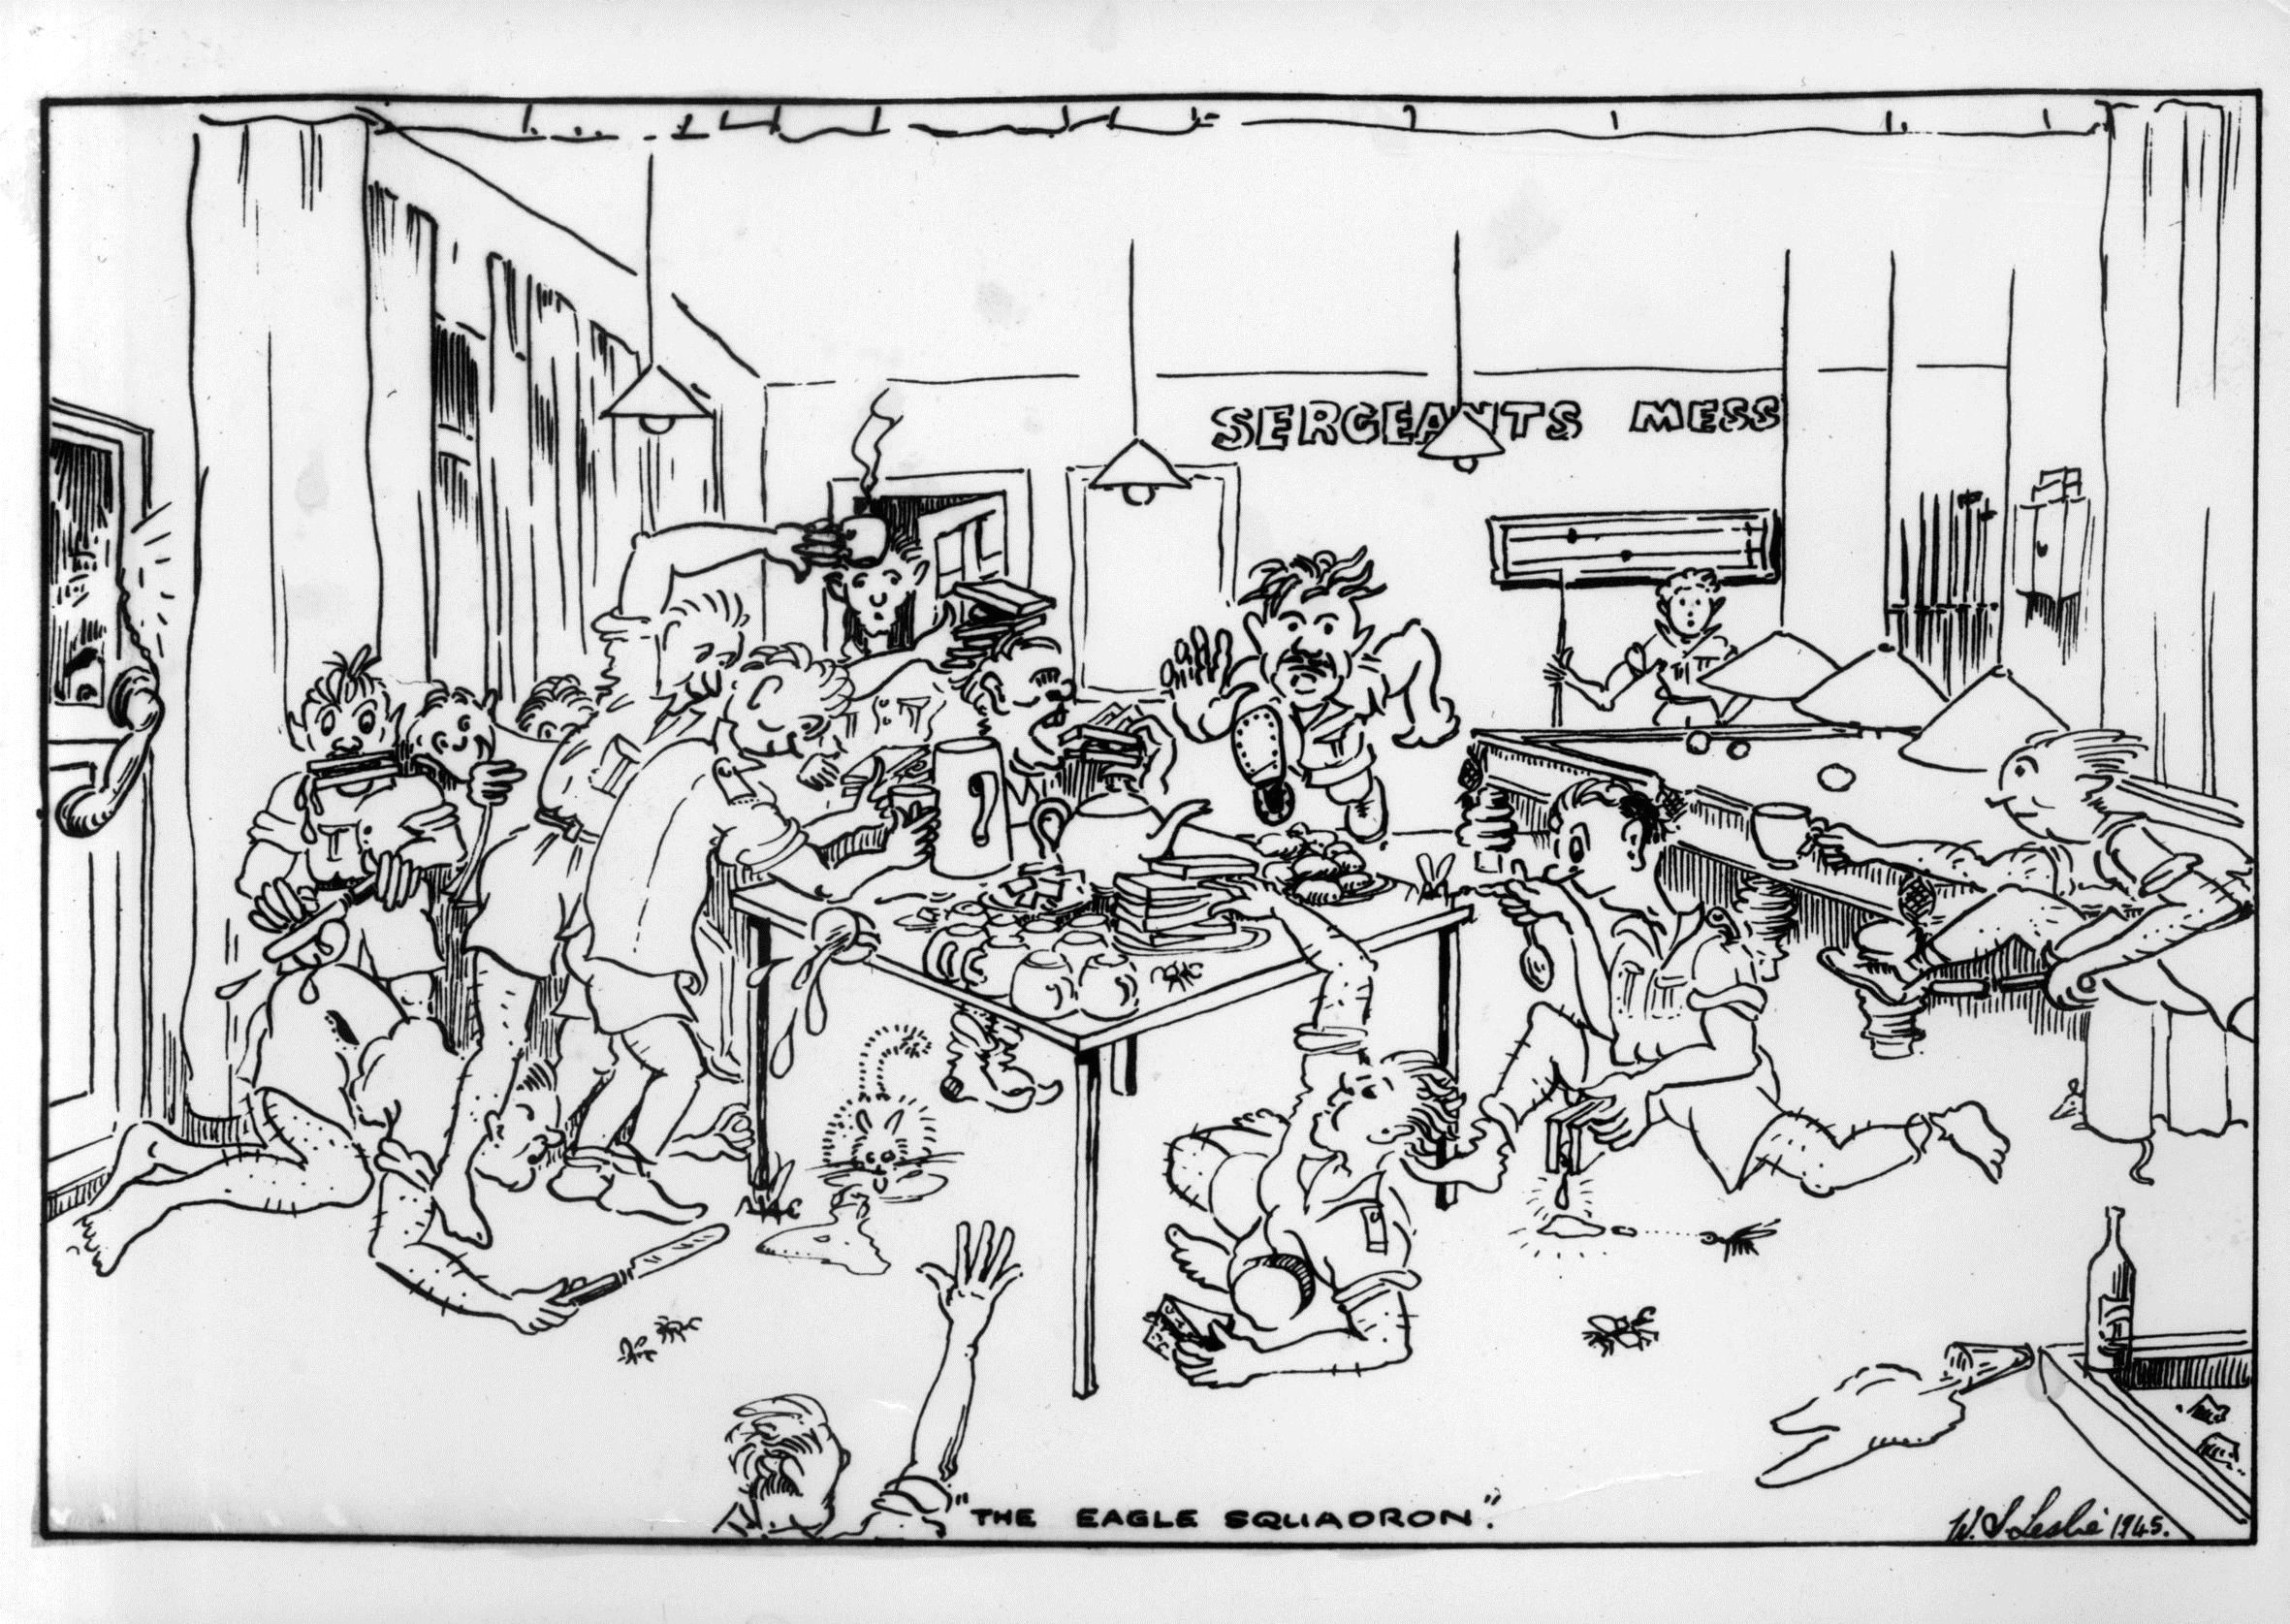 cartoon showing airmen in the sergeants mess titled eagle squadron signed by w s leslie 1945 from the collection of the air force museum of new